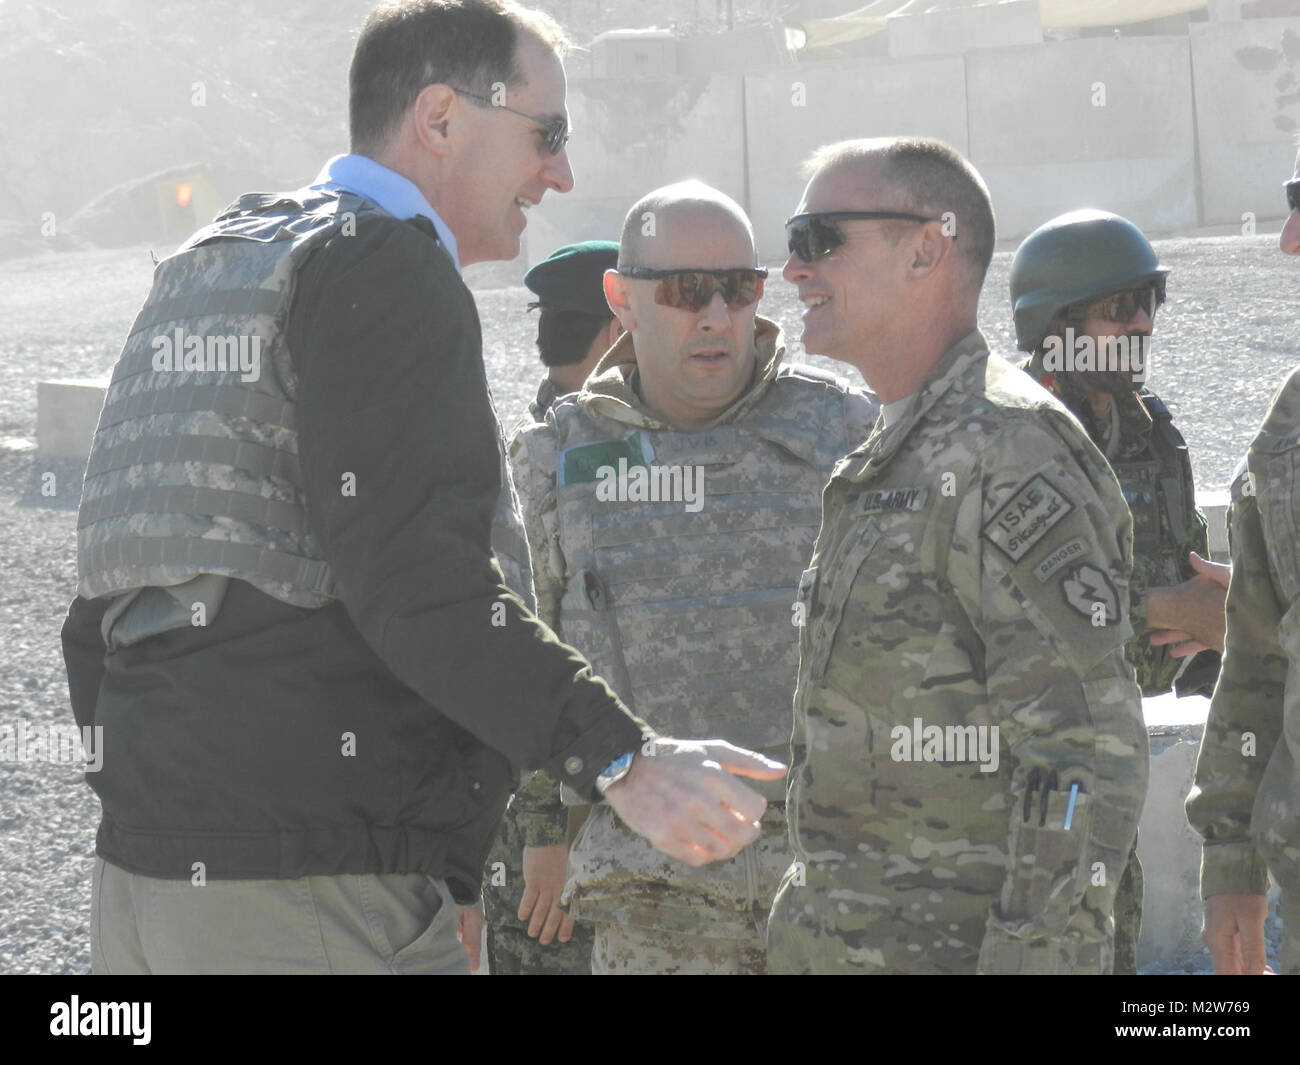 Col. Todd Wood, Commander of the 1st Stryker Brigade Combat Team, 25th Infantry Division, greets Dr. James Miller, Acting Under Secretary of Defense/ Principle Deputy Under Secretary of Defense for Policy, during Miller’s visit to Forward Operating Base Masum Ghar on March 8. (U.S. Army photo by Sgt. Michael Blalack, 1/25 SBCT Public Affairs.) 120308-A-AX238-001 by 1 Stryker Brigade Combat Team Arctic Wolves Stock Photo